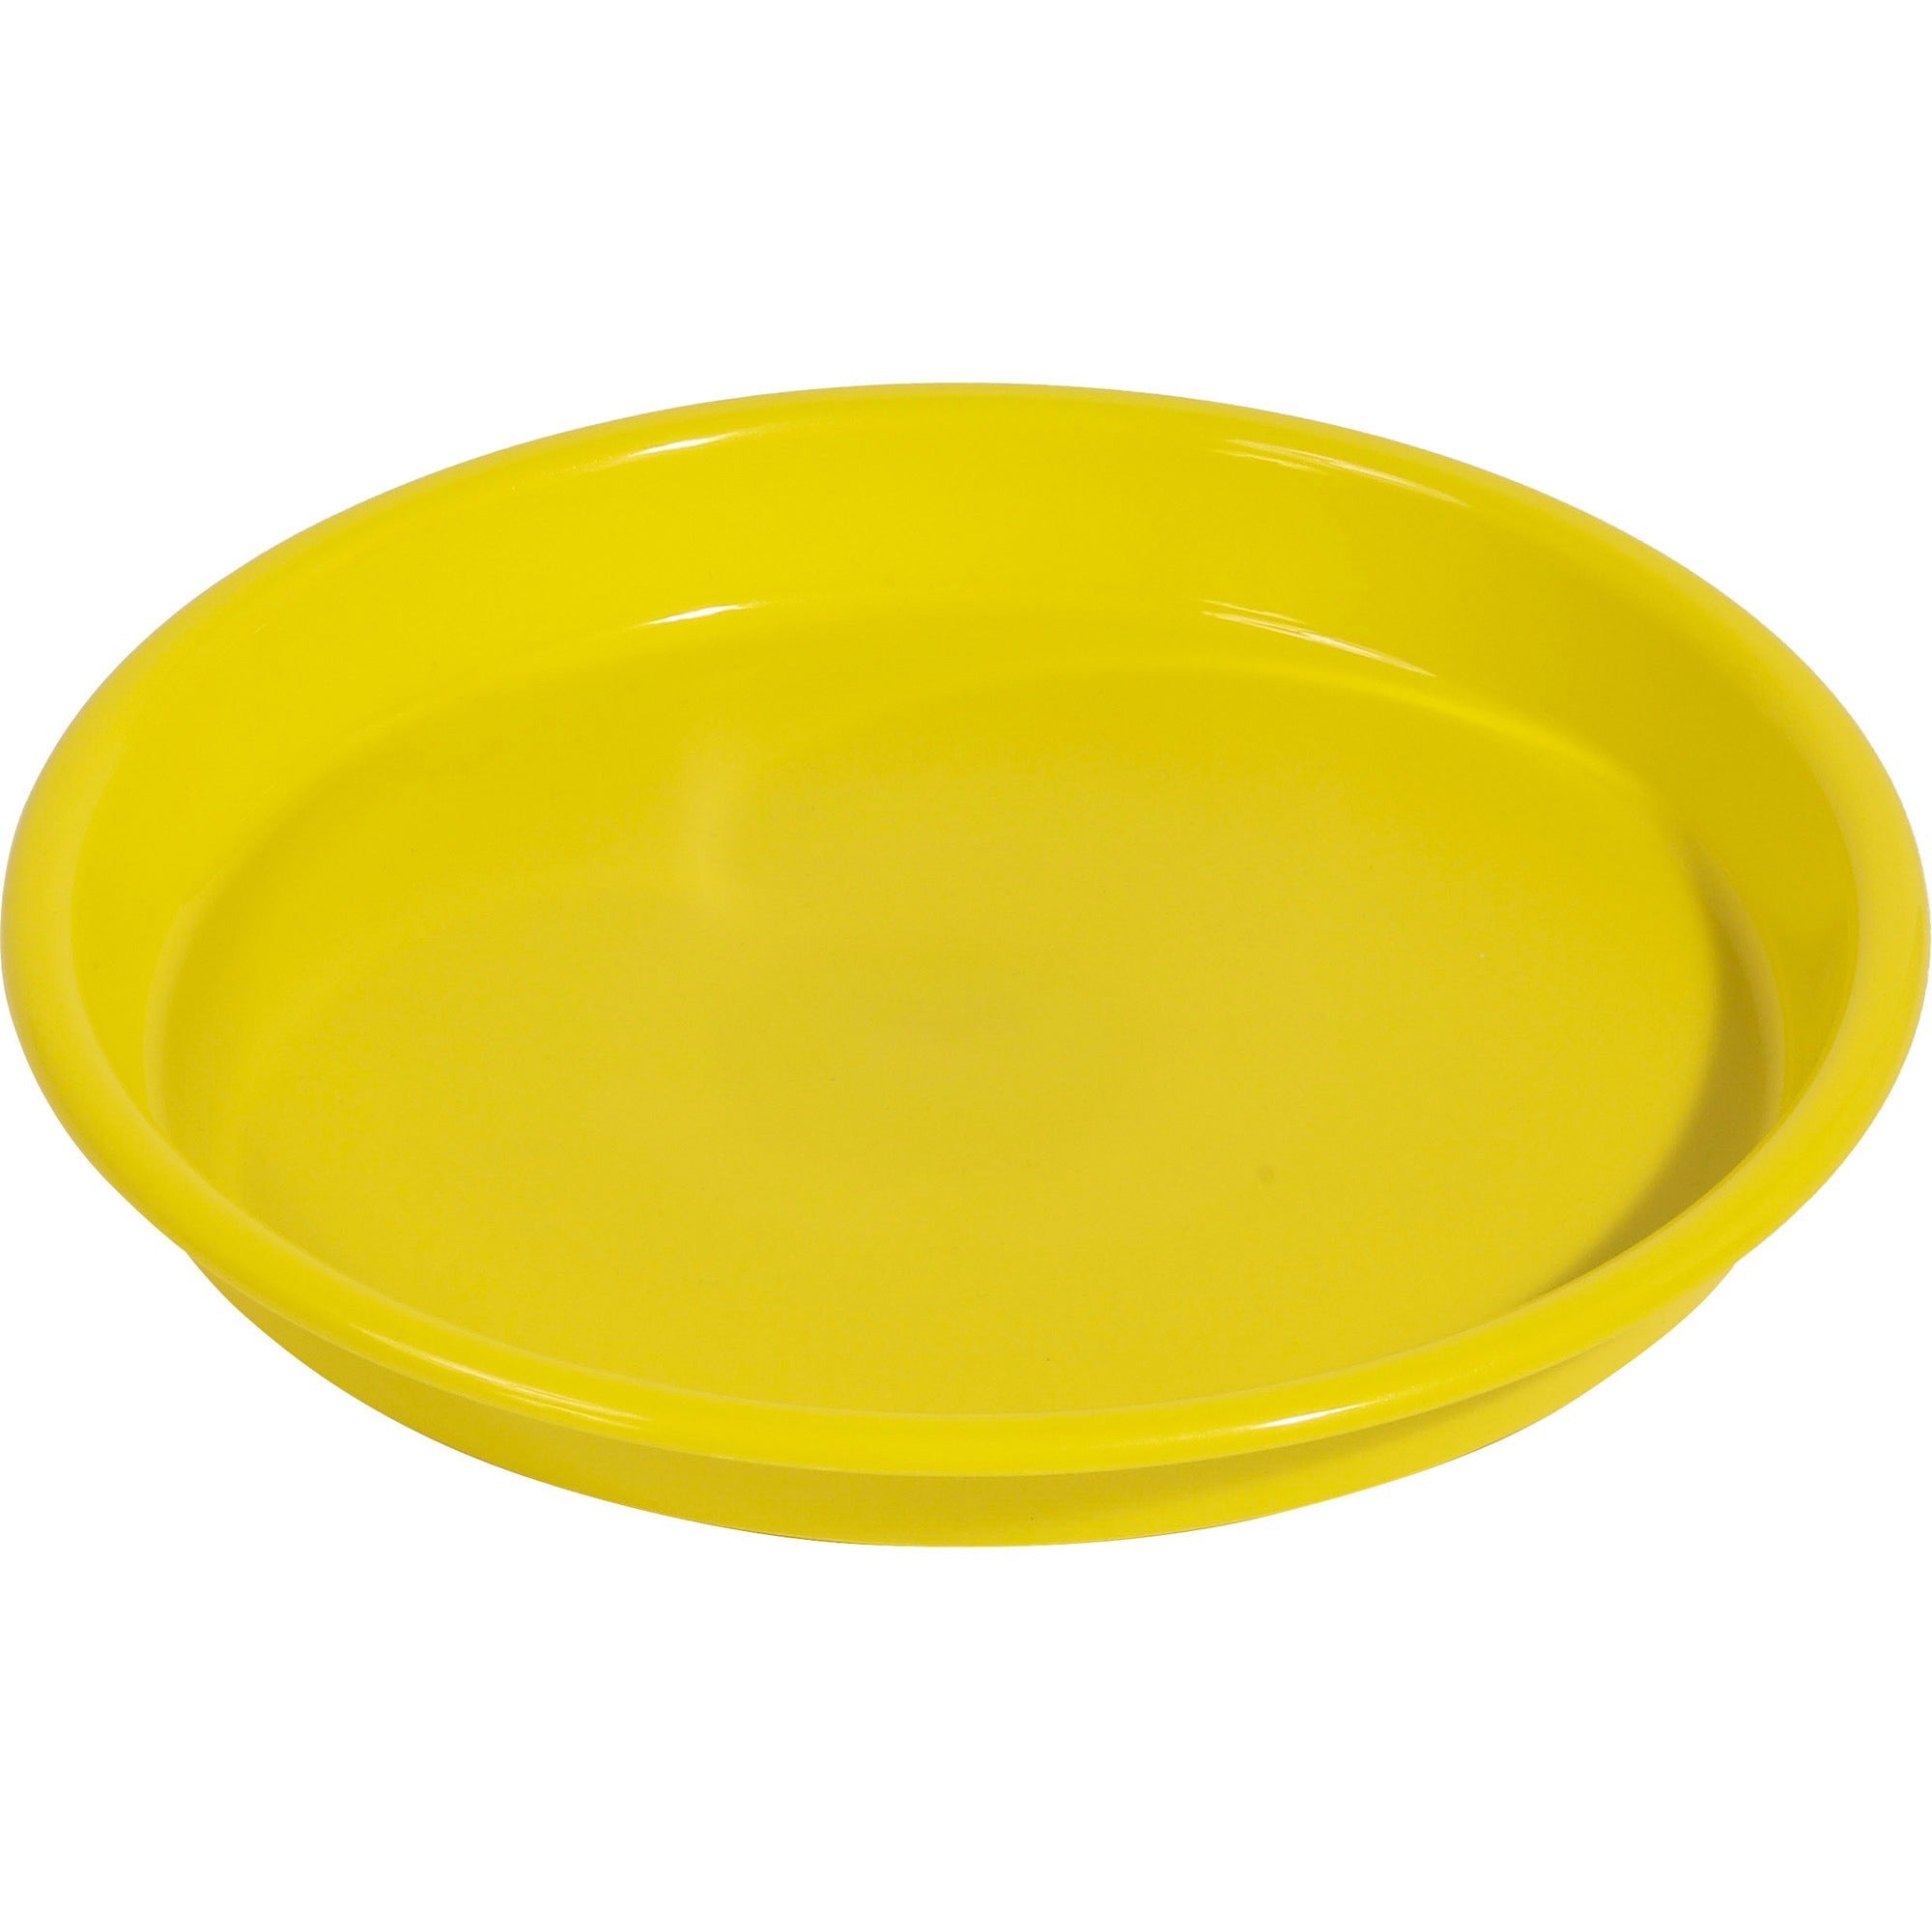 deflecto-kids-antimicrobial-round-craft-tray-accessories-art-craft-161height-x-1307width-x-1307depth-1-each-yellow-polypropylene_def39514yel - 1